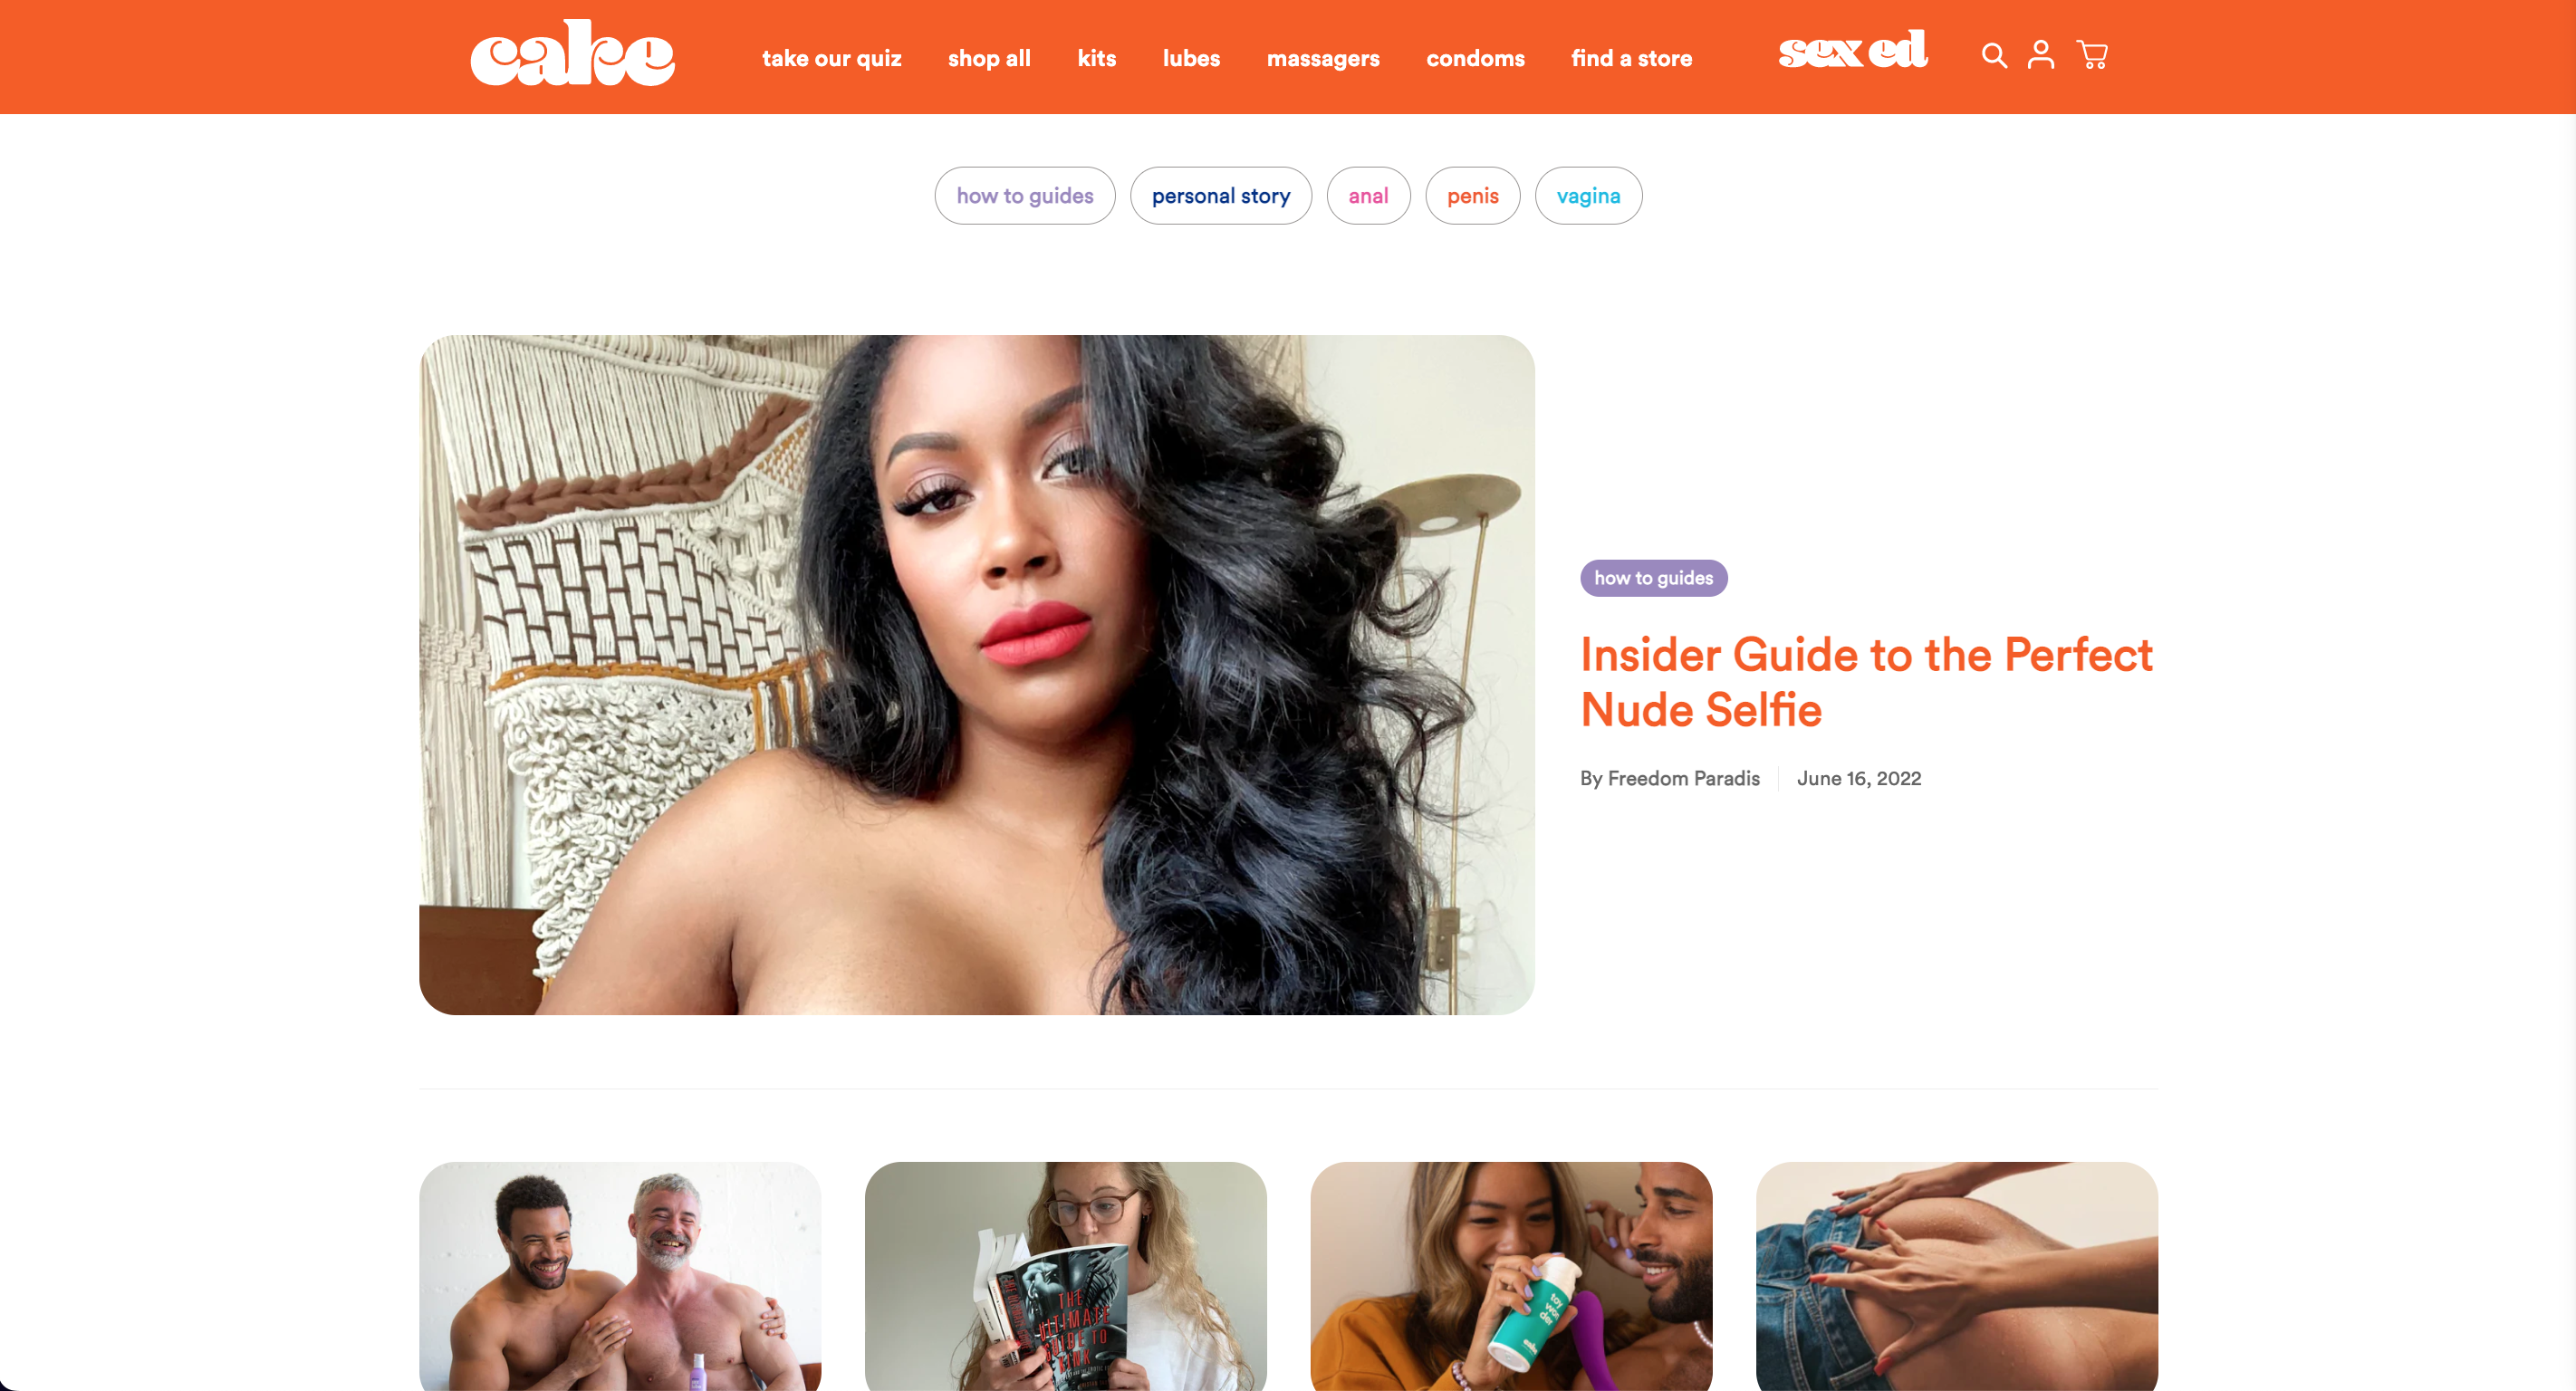 “Insider Guide to the Perfect Nude Selfie”